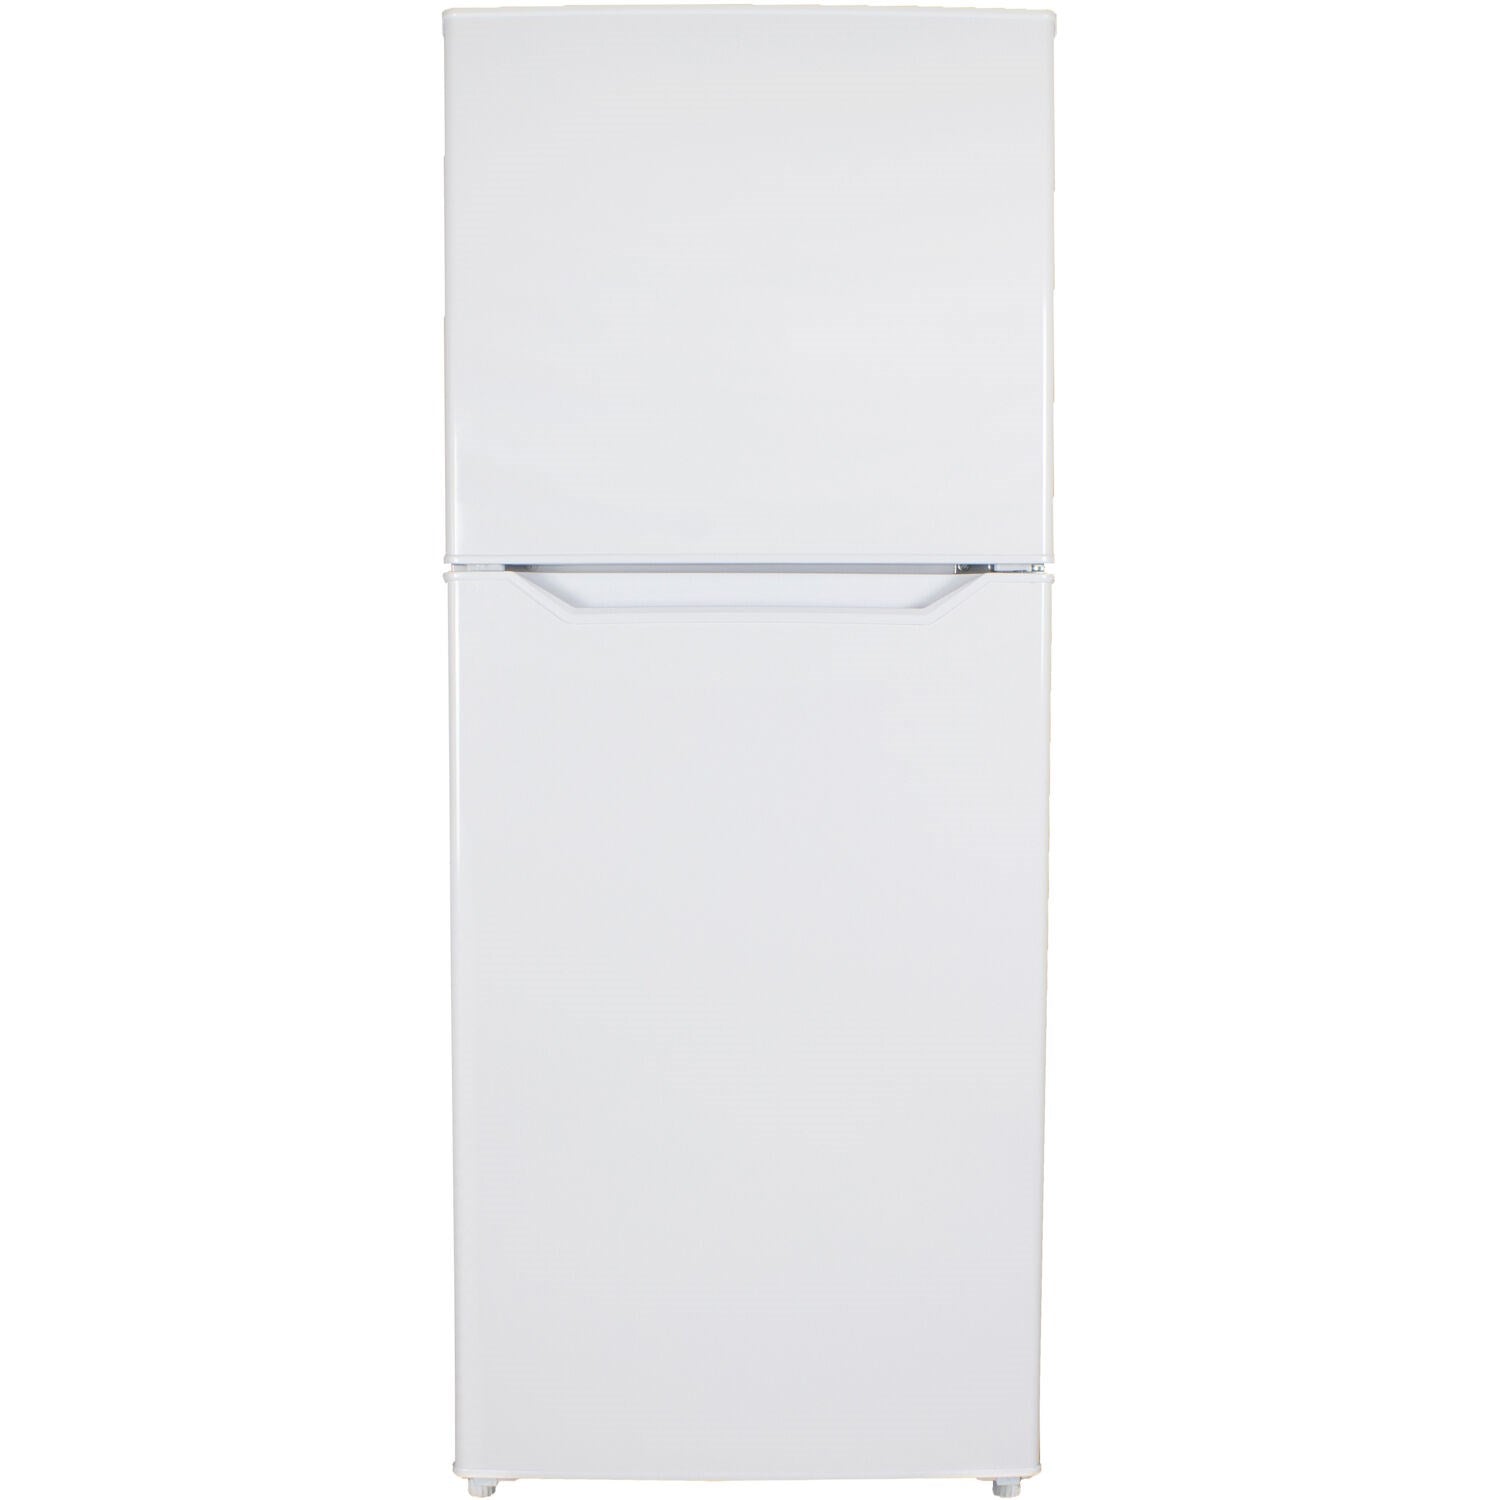 Danby - 10.1 CuFt. Top Mount Freezer, Frost Free, Crisper with Cover